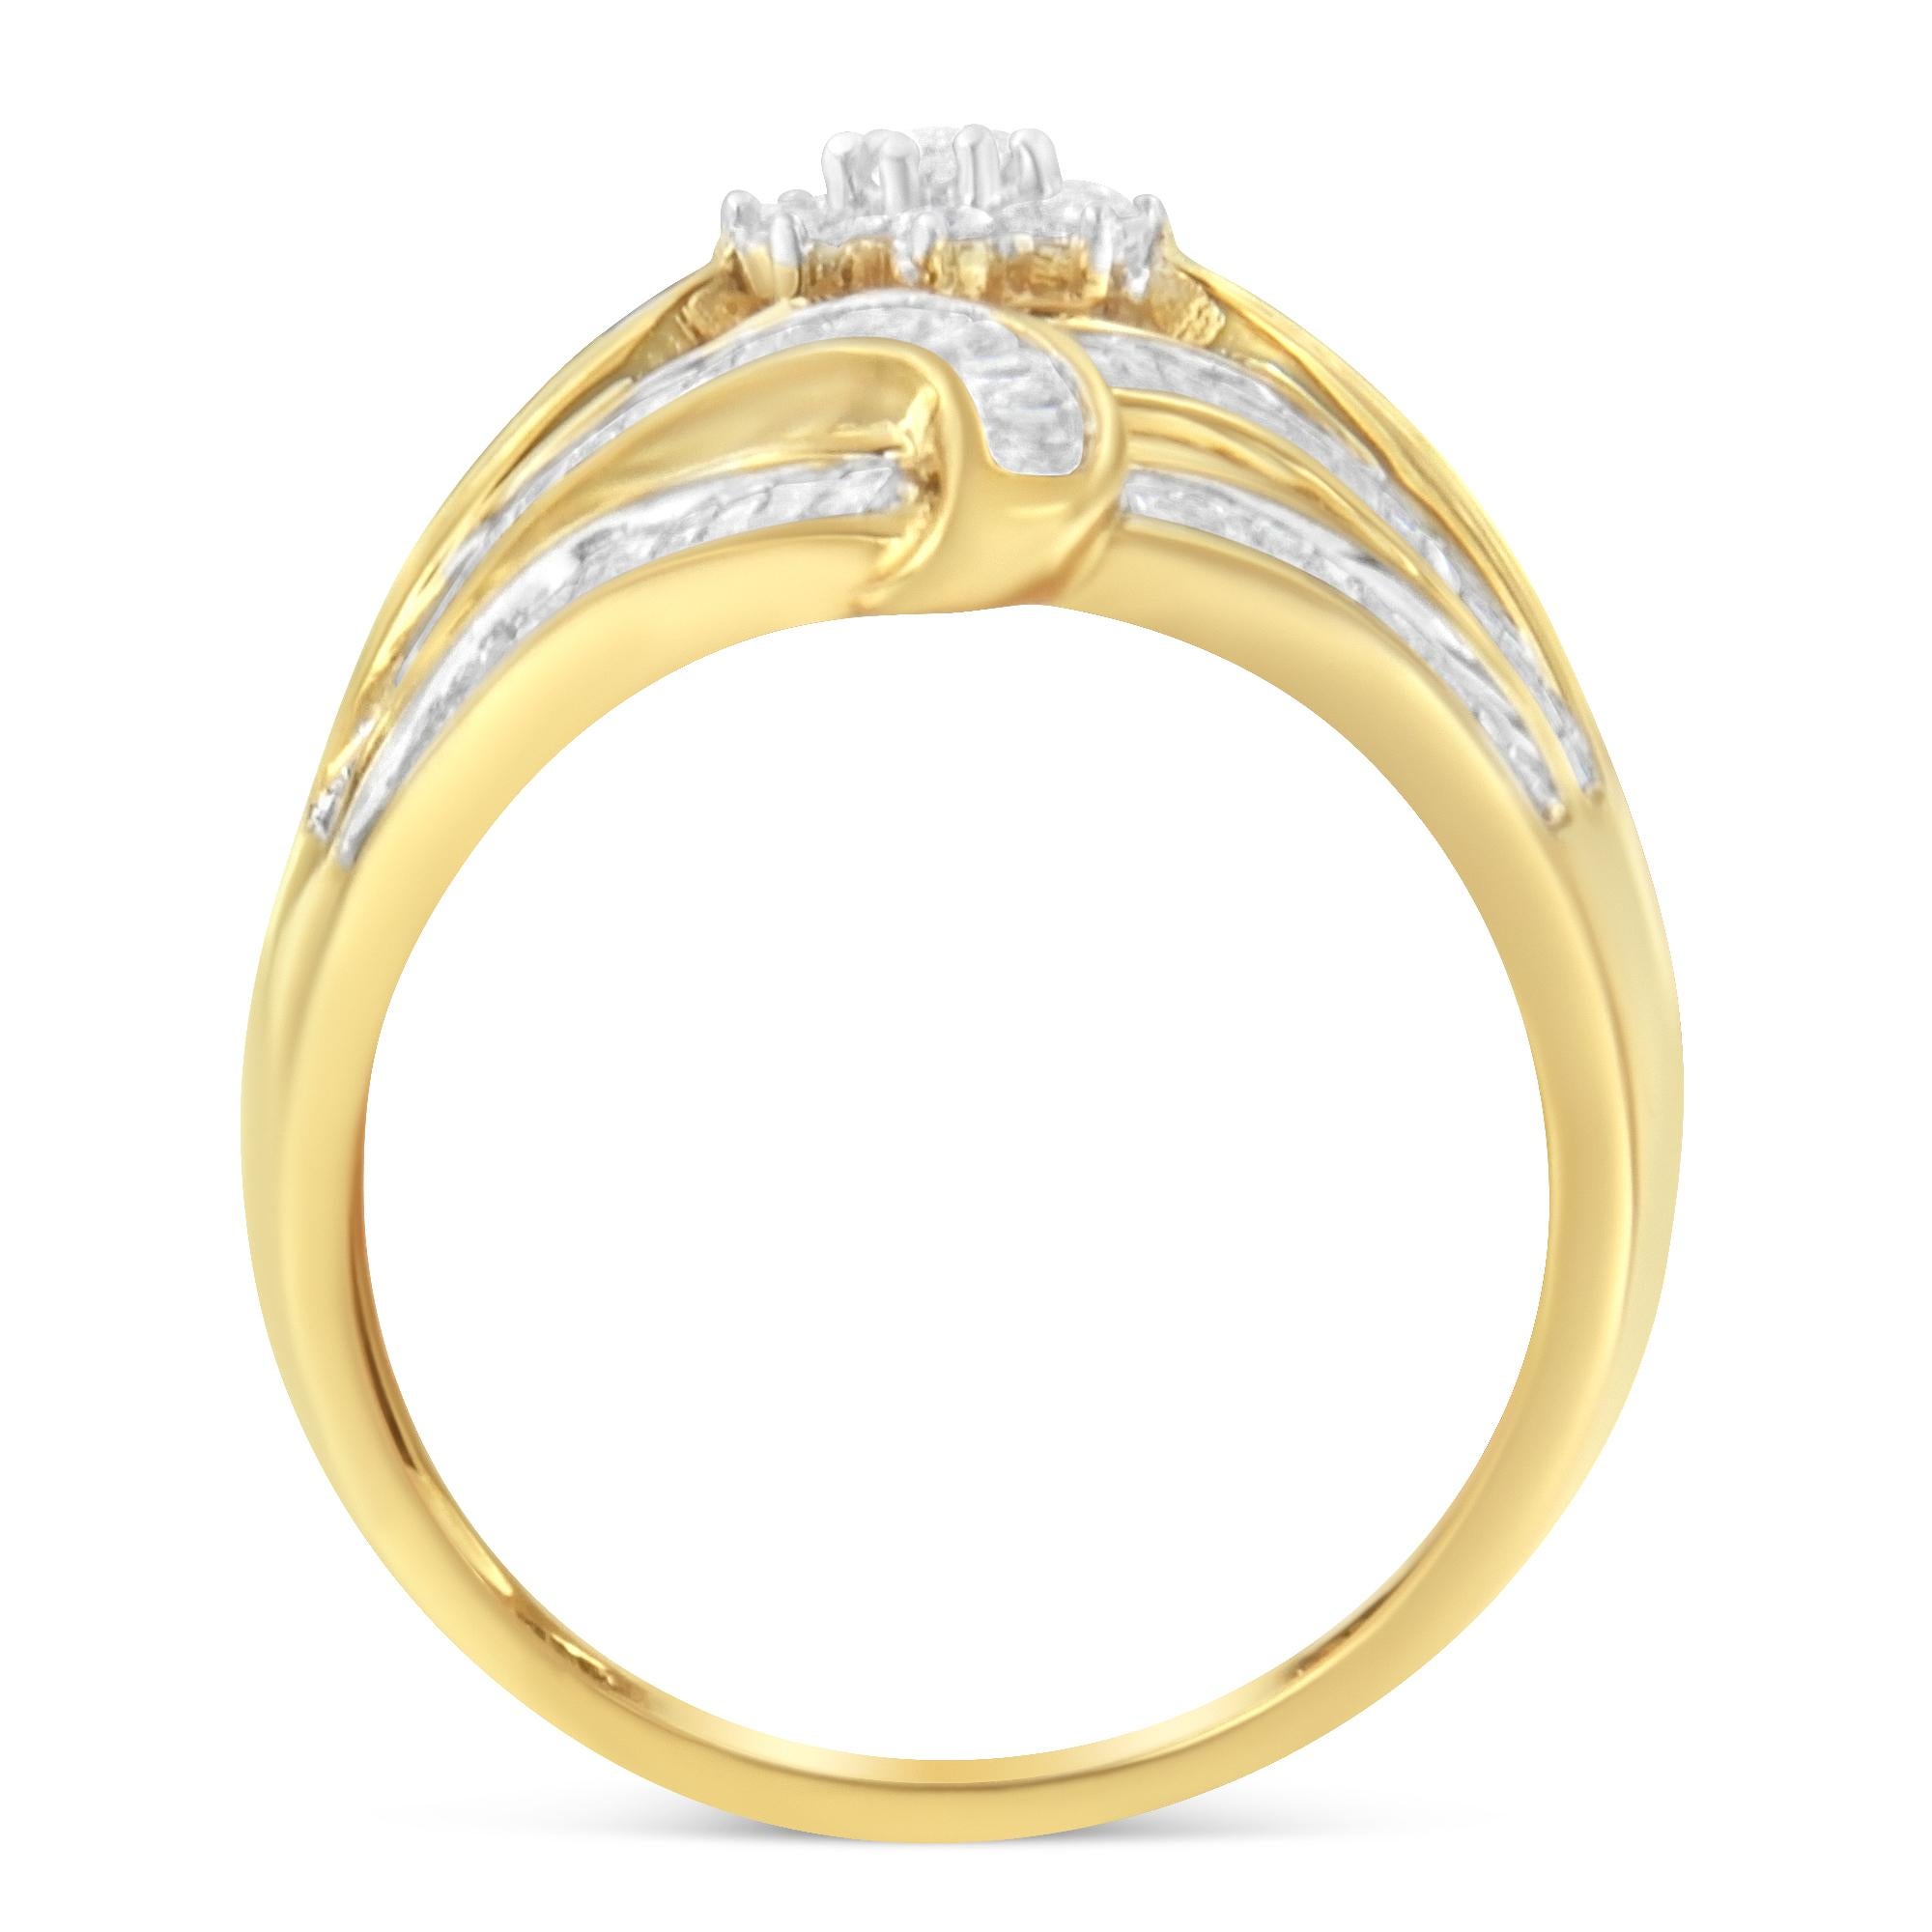 This beautiful diamond ring is the perfect anniversary gift for her. Made in the finest 10k yellow gold, this unique piece is embellished with 9 round cut and 132 baguette cut diamonds in a prong and channel setting respectively. Weighing a total